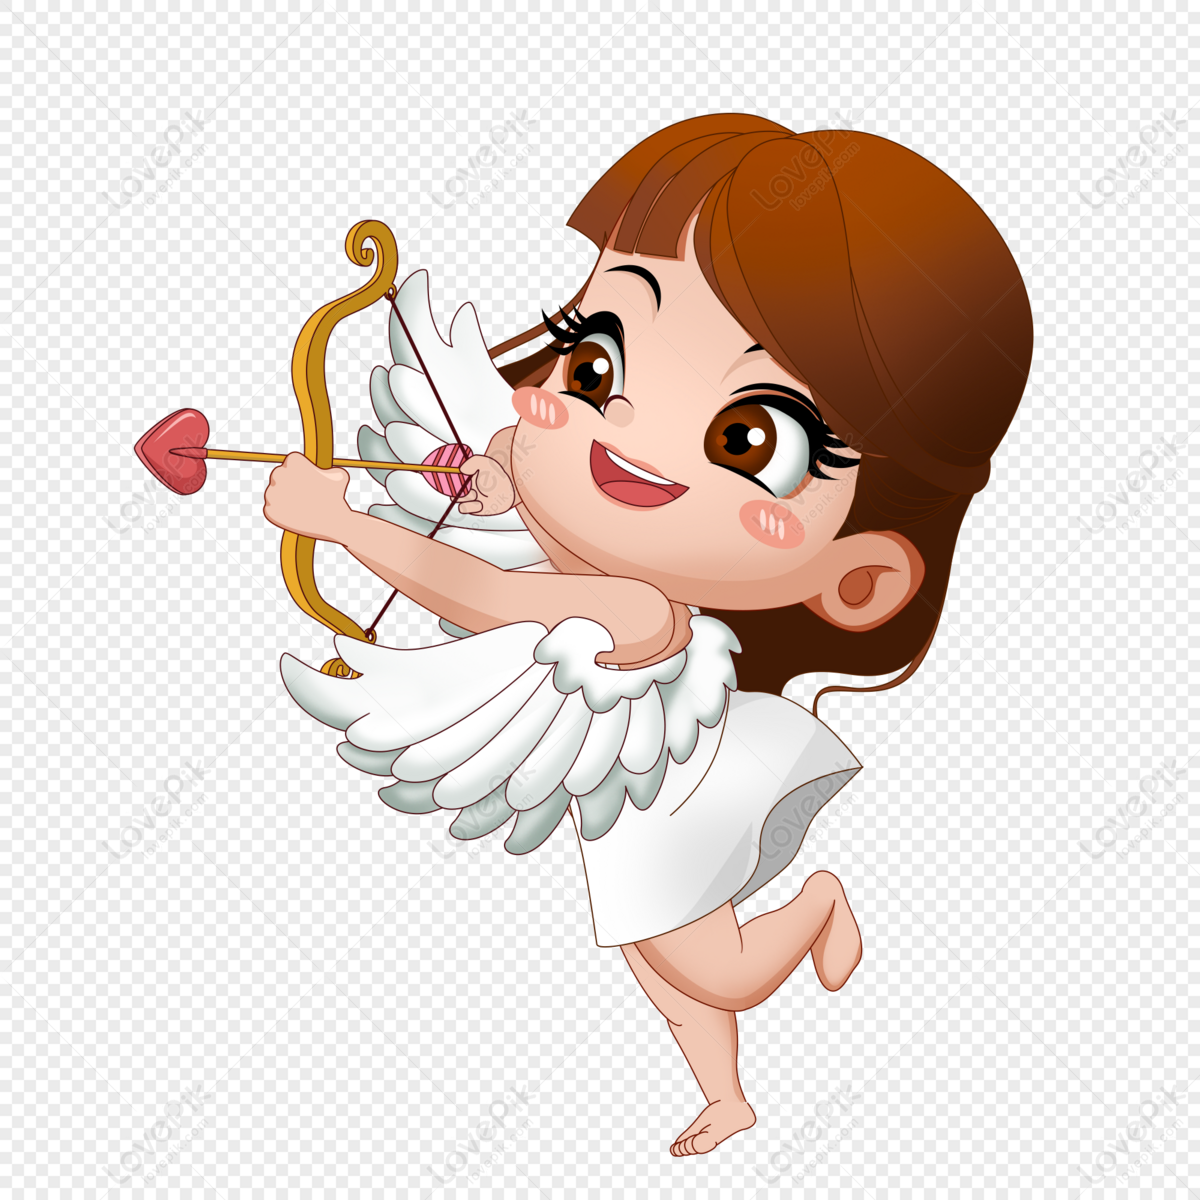 Female Cupid Archery PNG Image Free Download And Clipart Image For Free  Download - Lovepik | 400943821